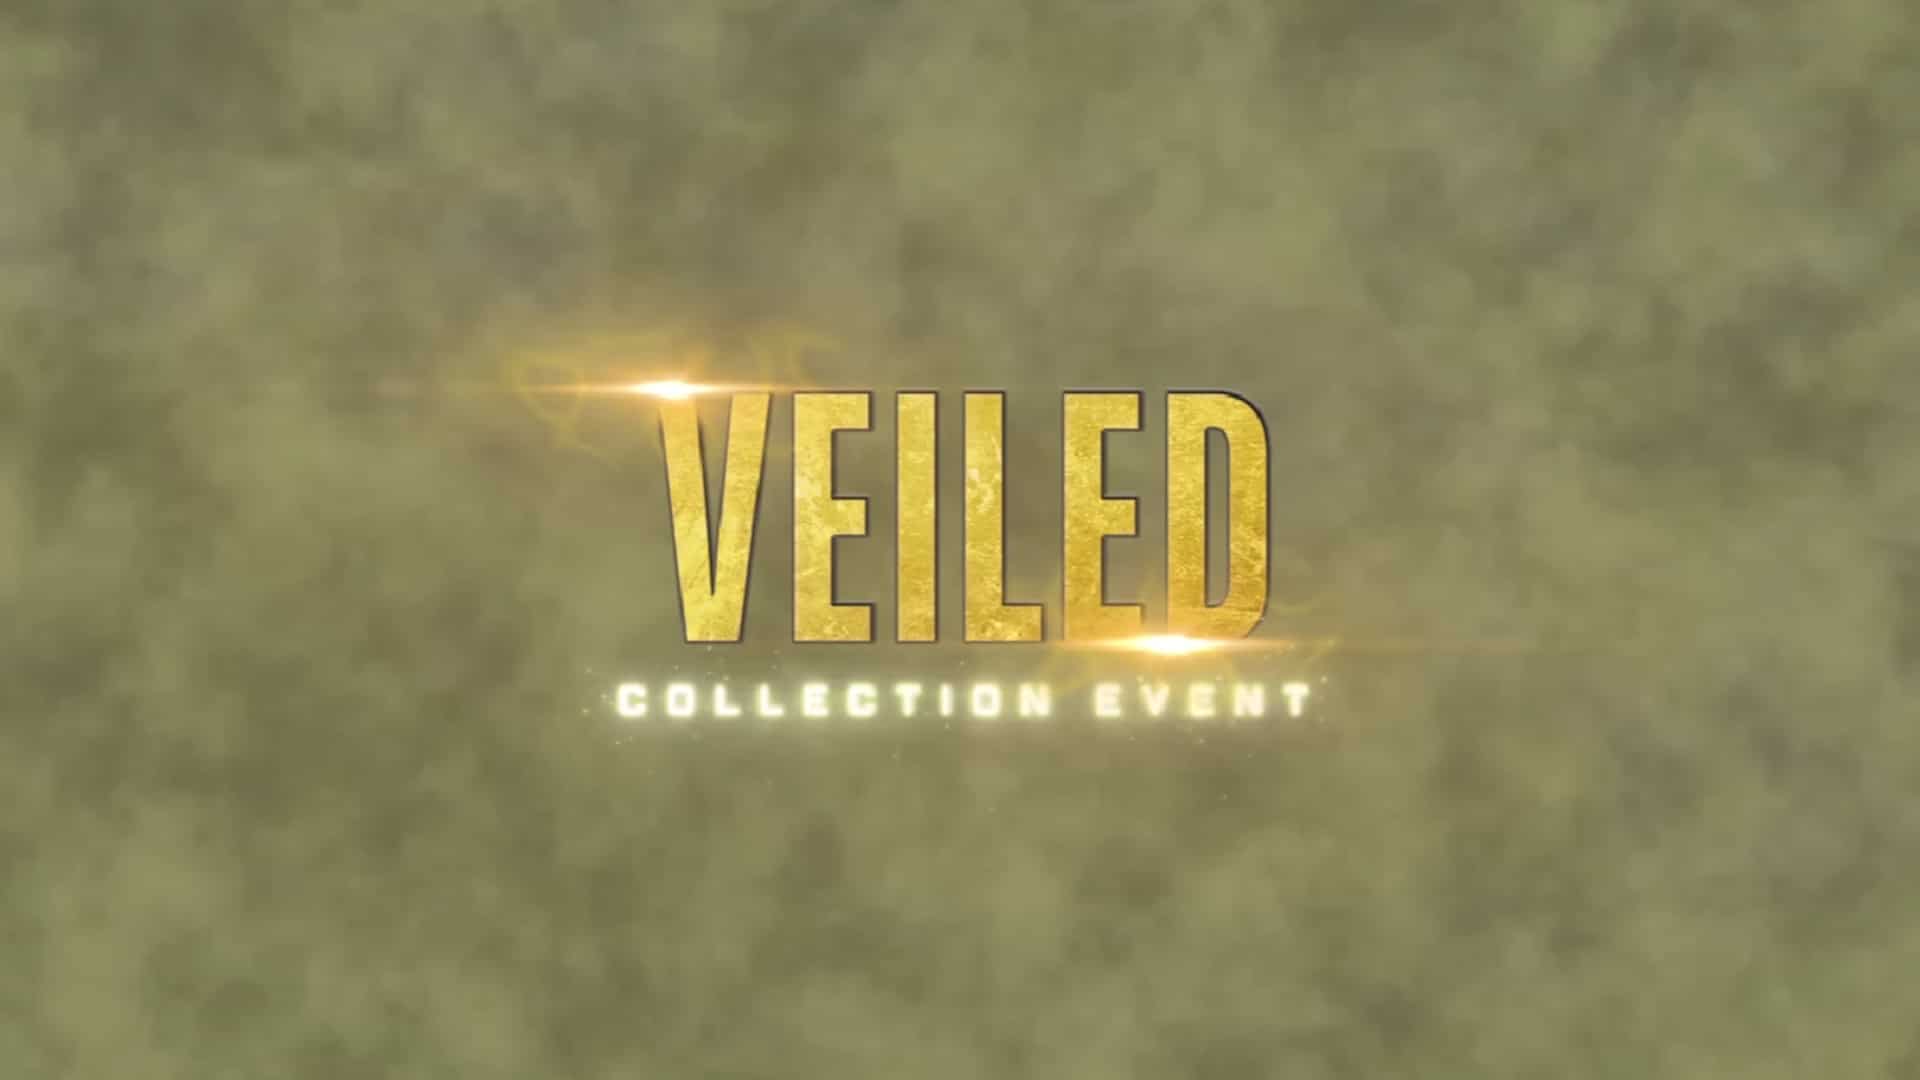 Apex Legends Veiled Collection Event Details: Get These Limited-Time Cosmetics Now